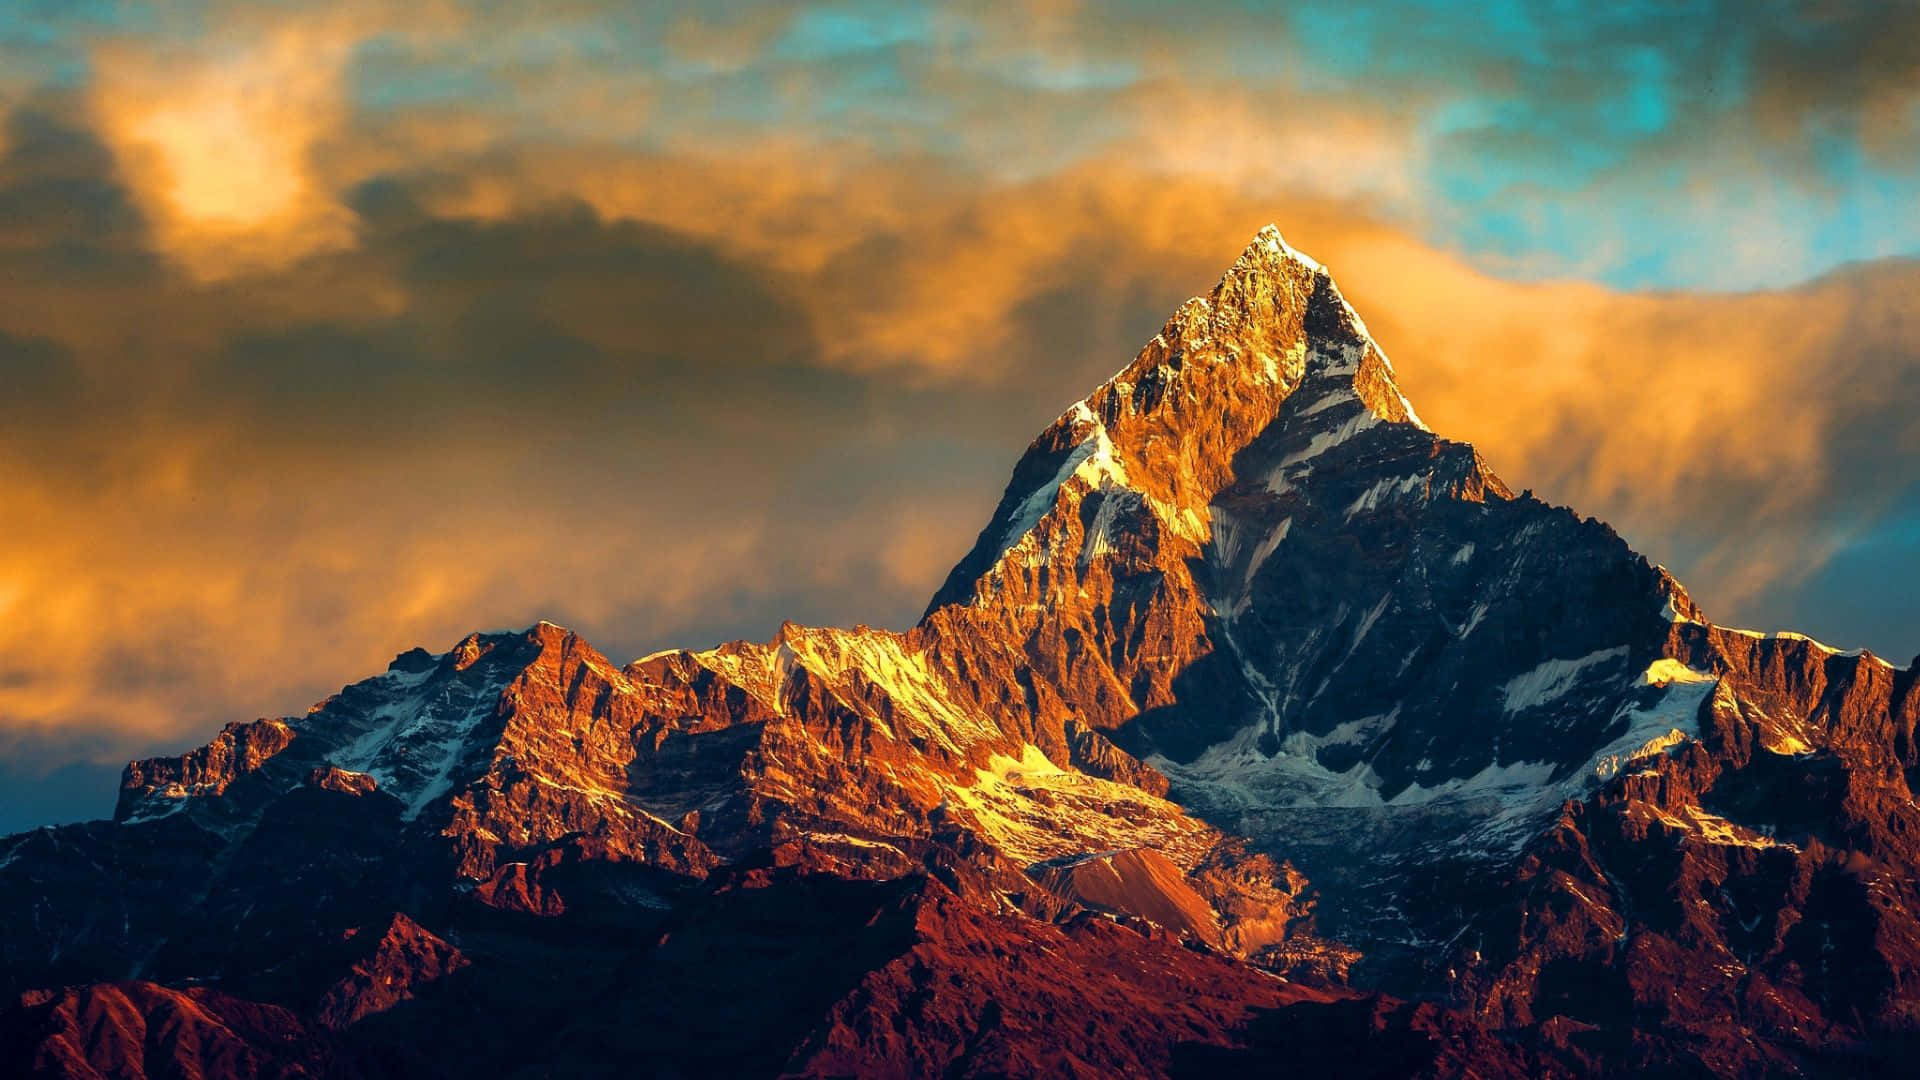 200+ Mount Everest Images & Wallpapers in HD - Pixabay